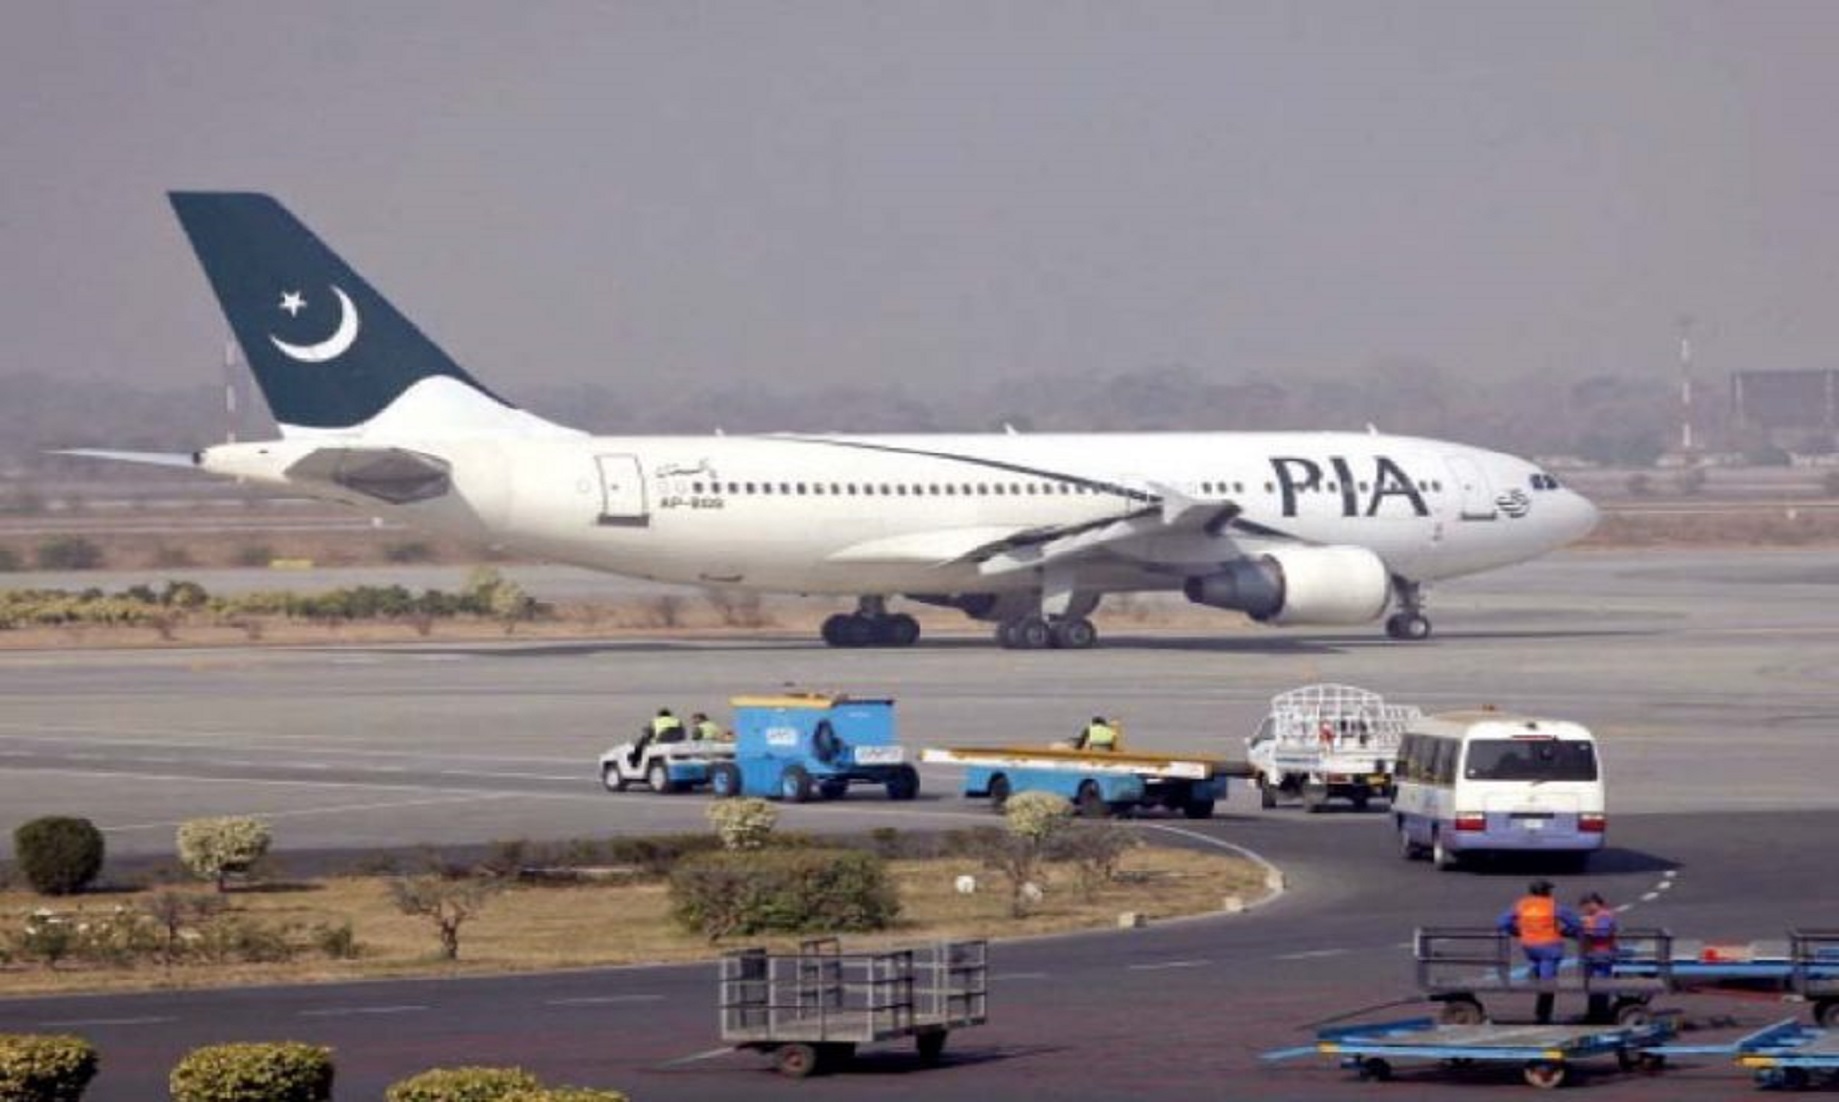 Pakistan’s National Airline Resumes Direct Flights To Iran After Five Years